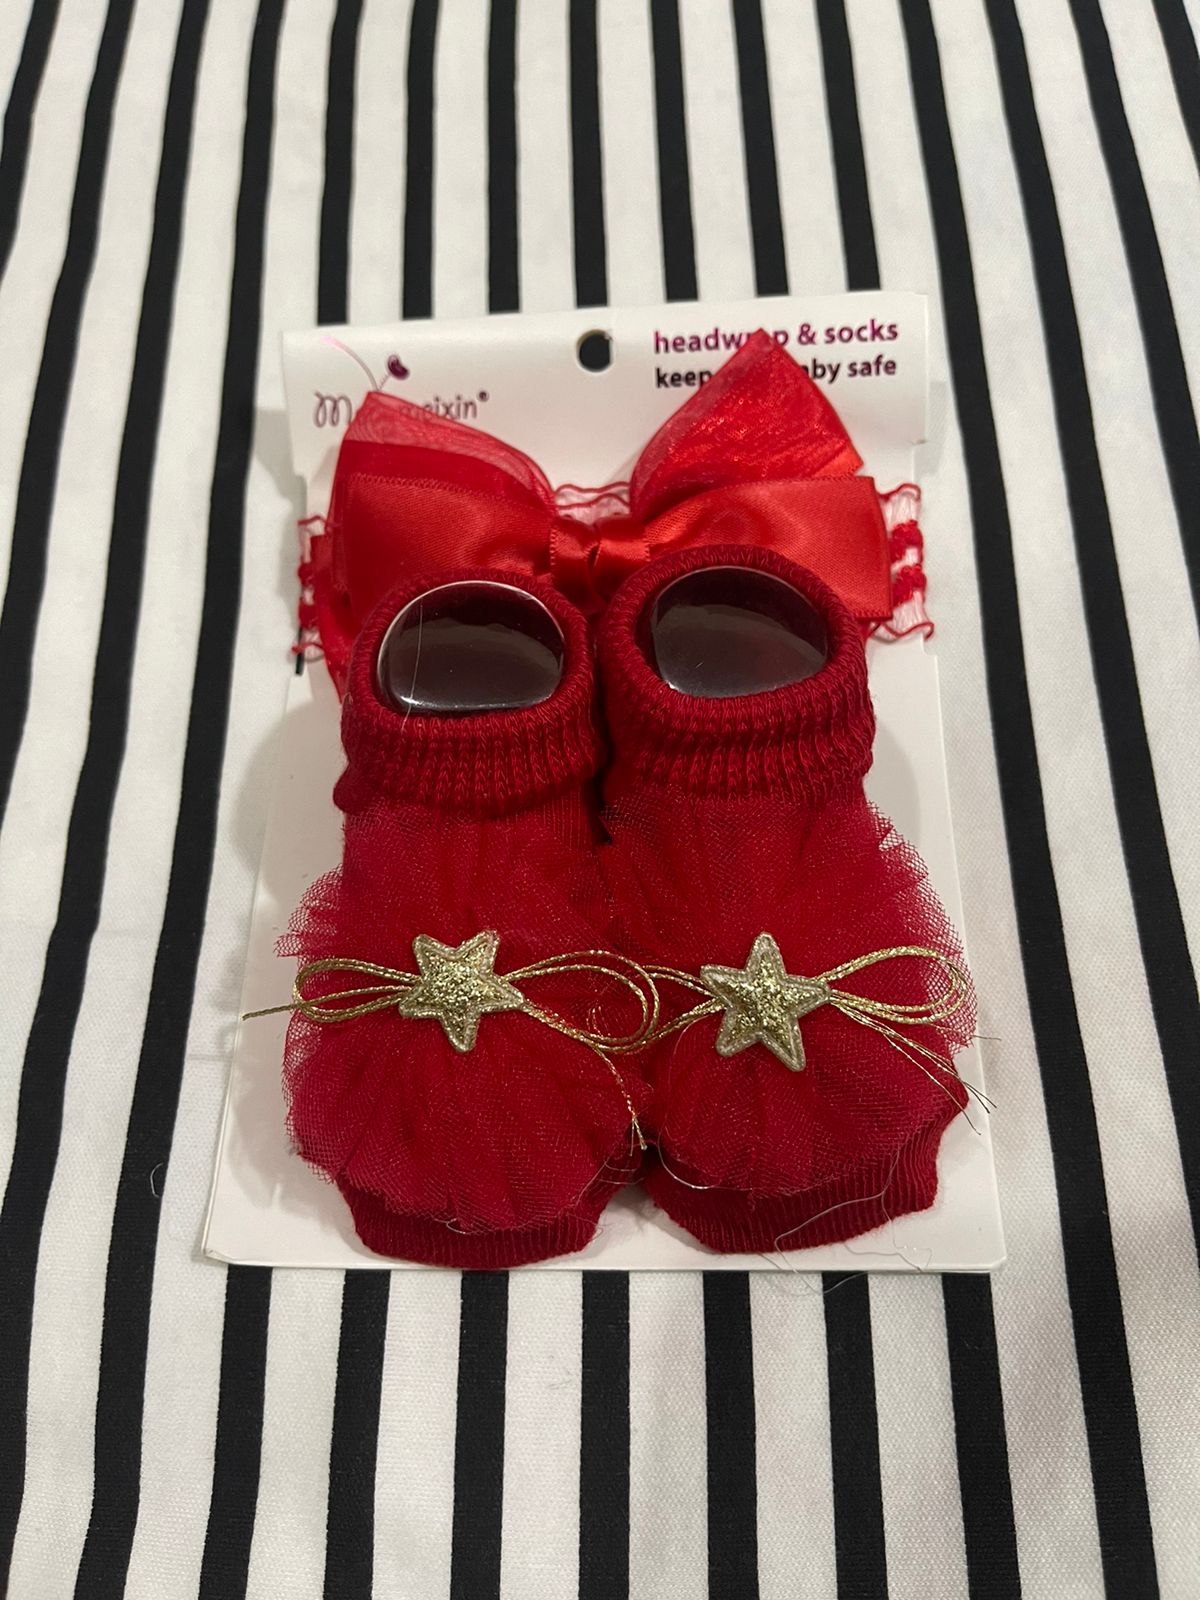 Red socks and head band for little princess